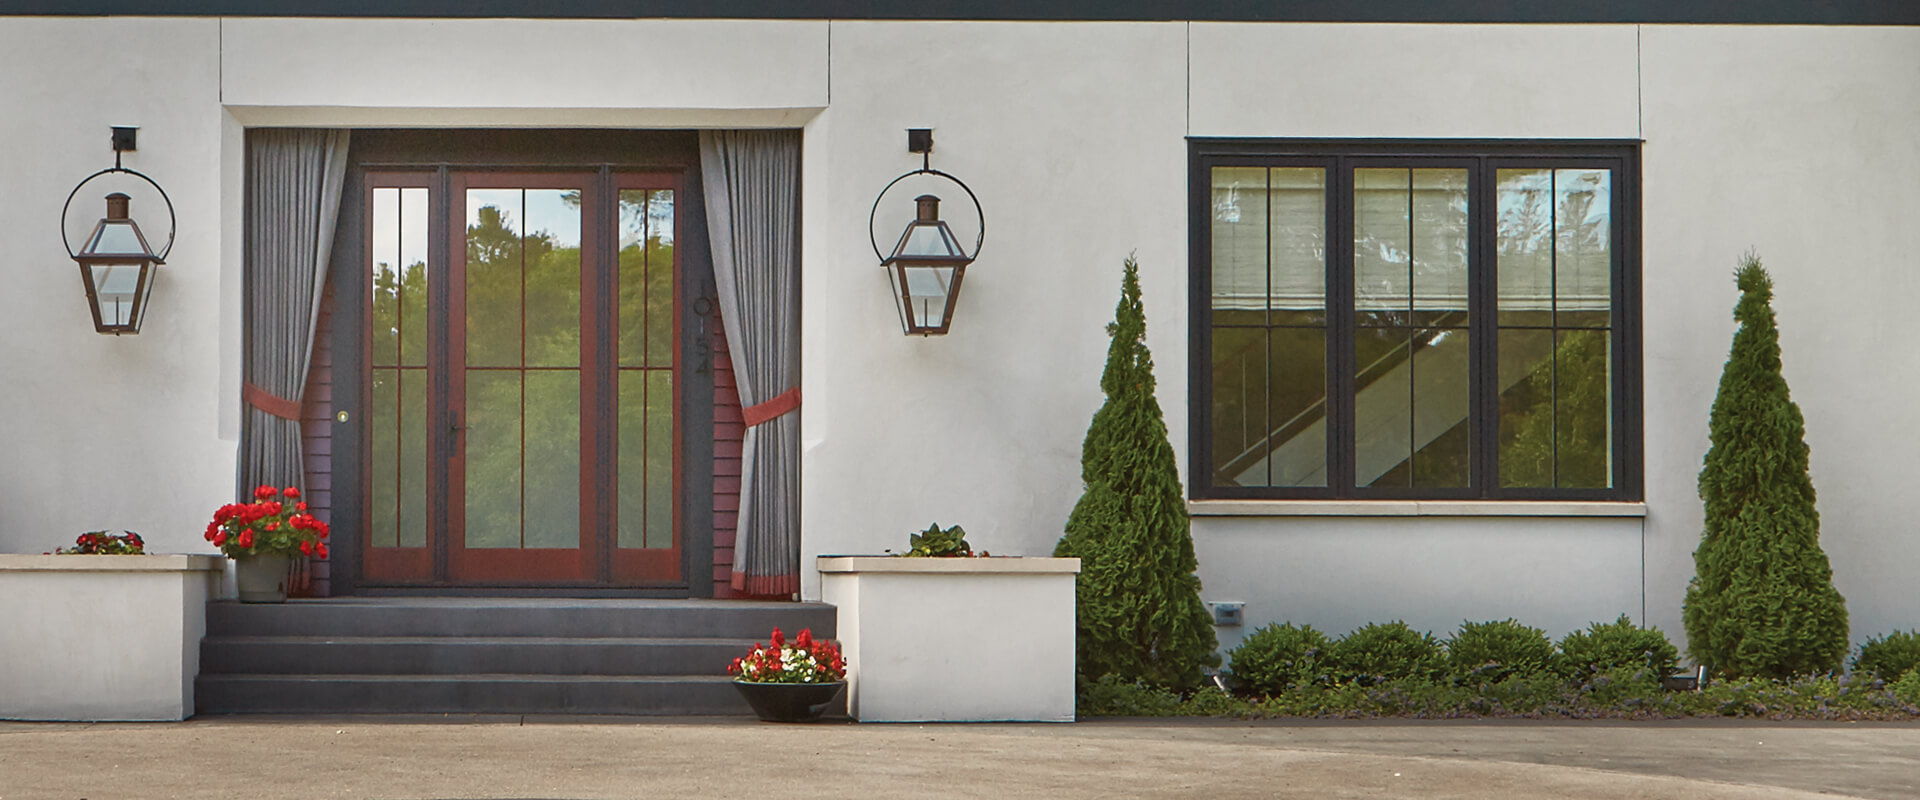 Heritage Series entrance doors with raised panels and an Ultra Series segment head transom.